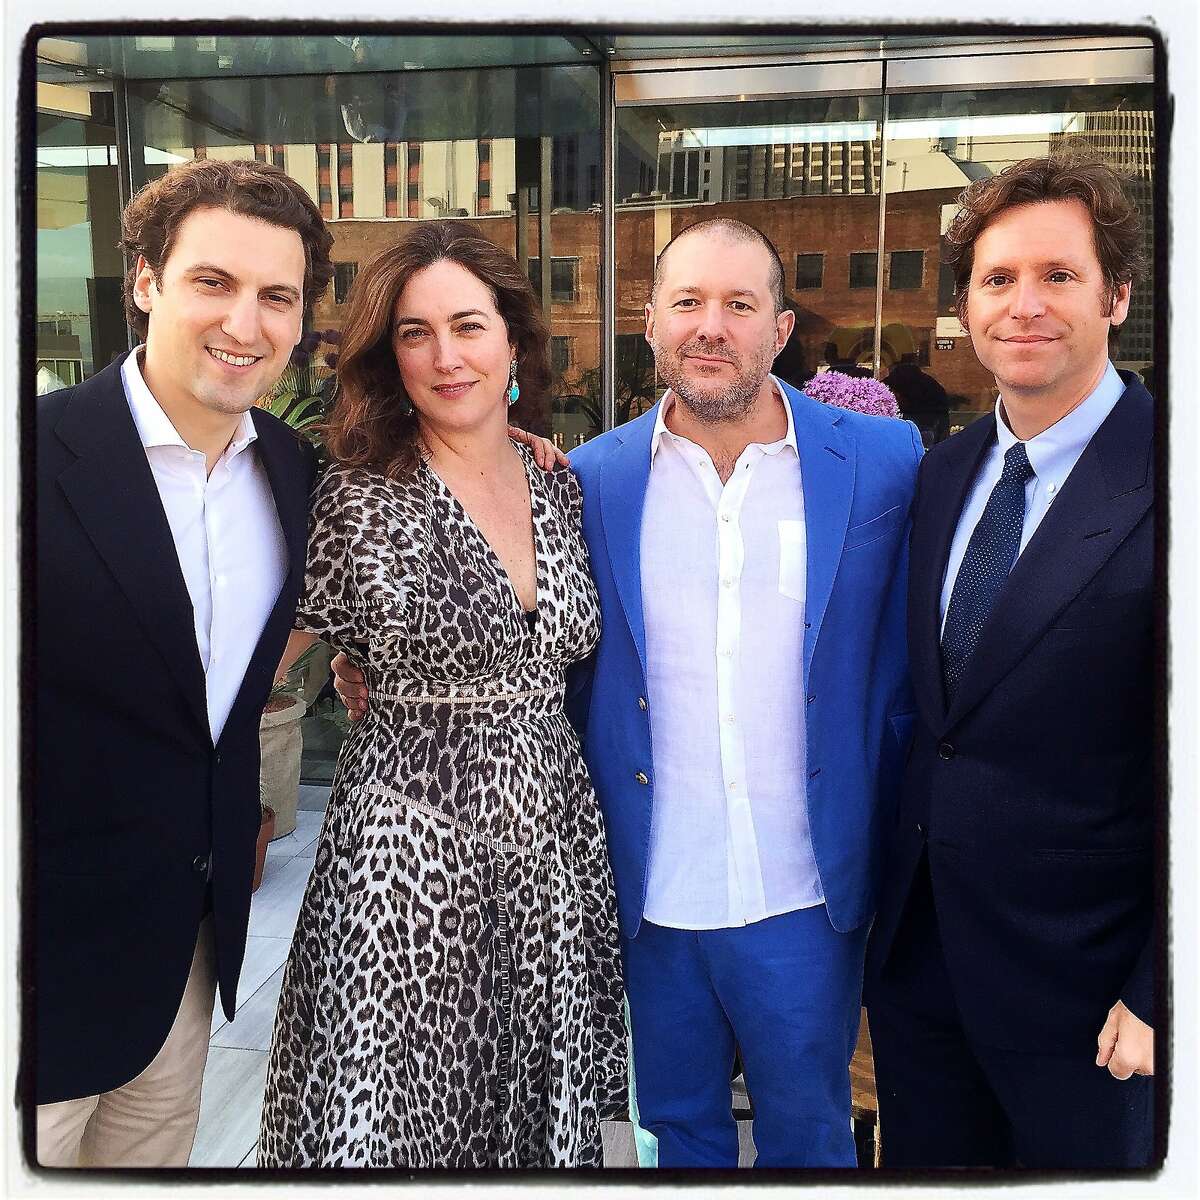 Krug Champagne US Director Vincent Pages (at left) with Alexis Traina, Apple Design Chief Jony Ive and ifonly.com host Trevor Traina at The Battery. June 2015. By Catherine Bigelow.